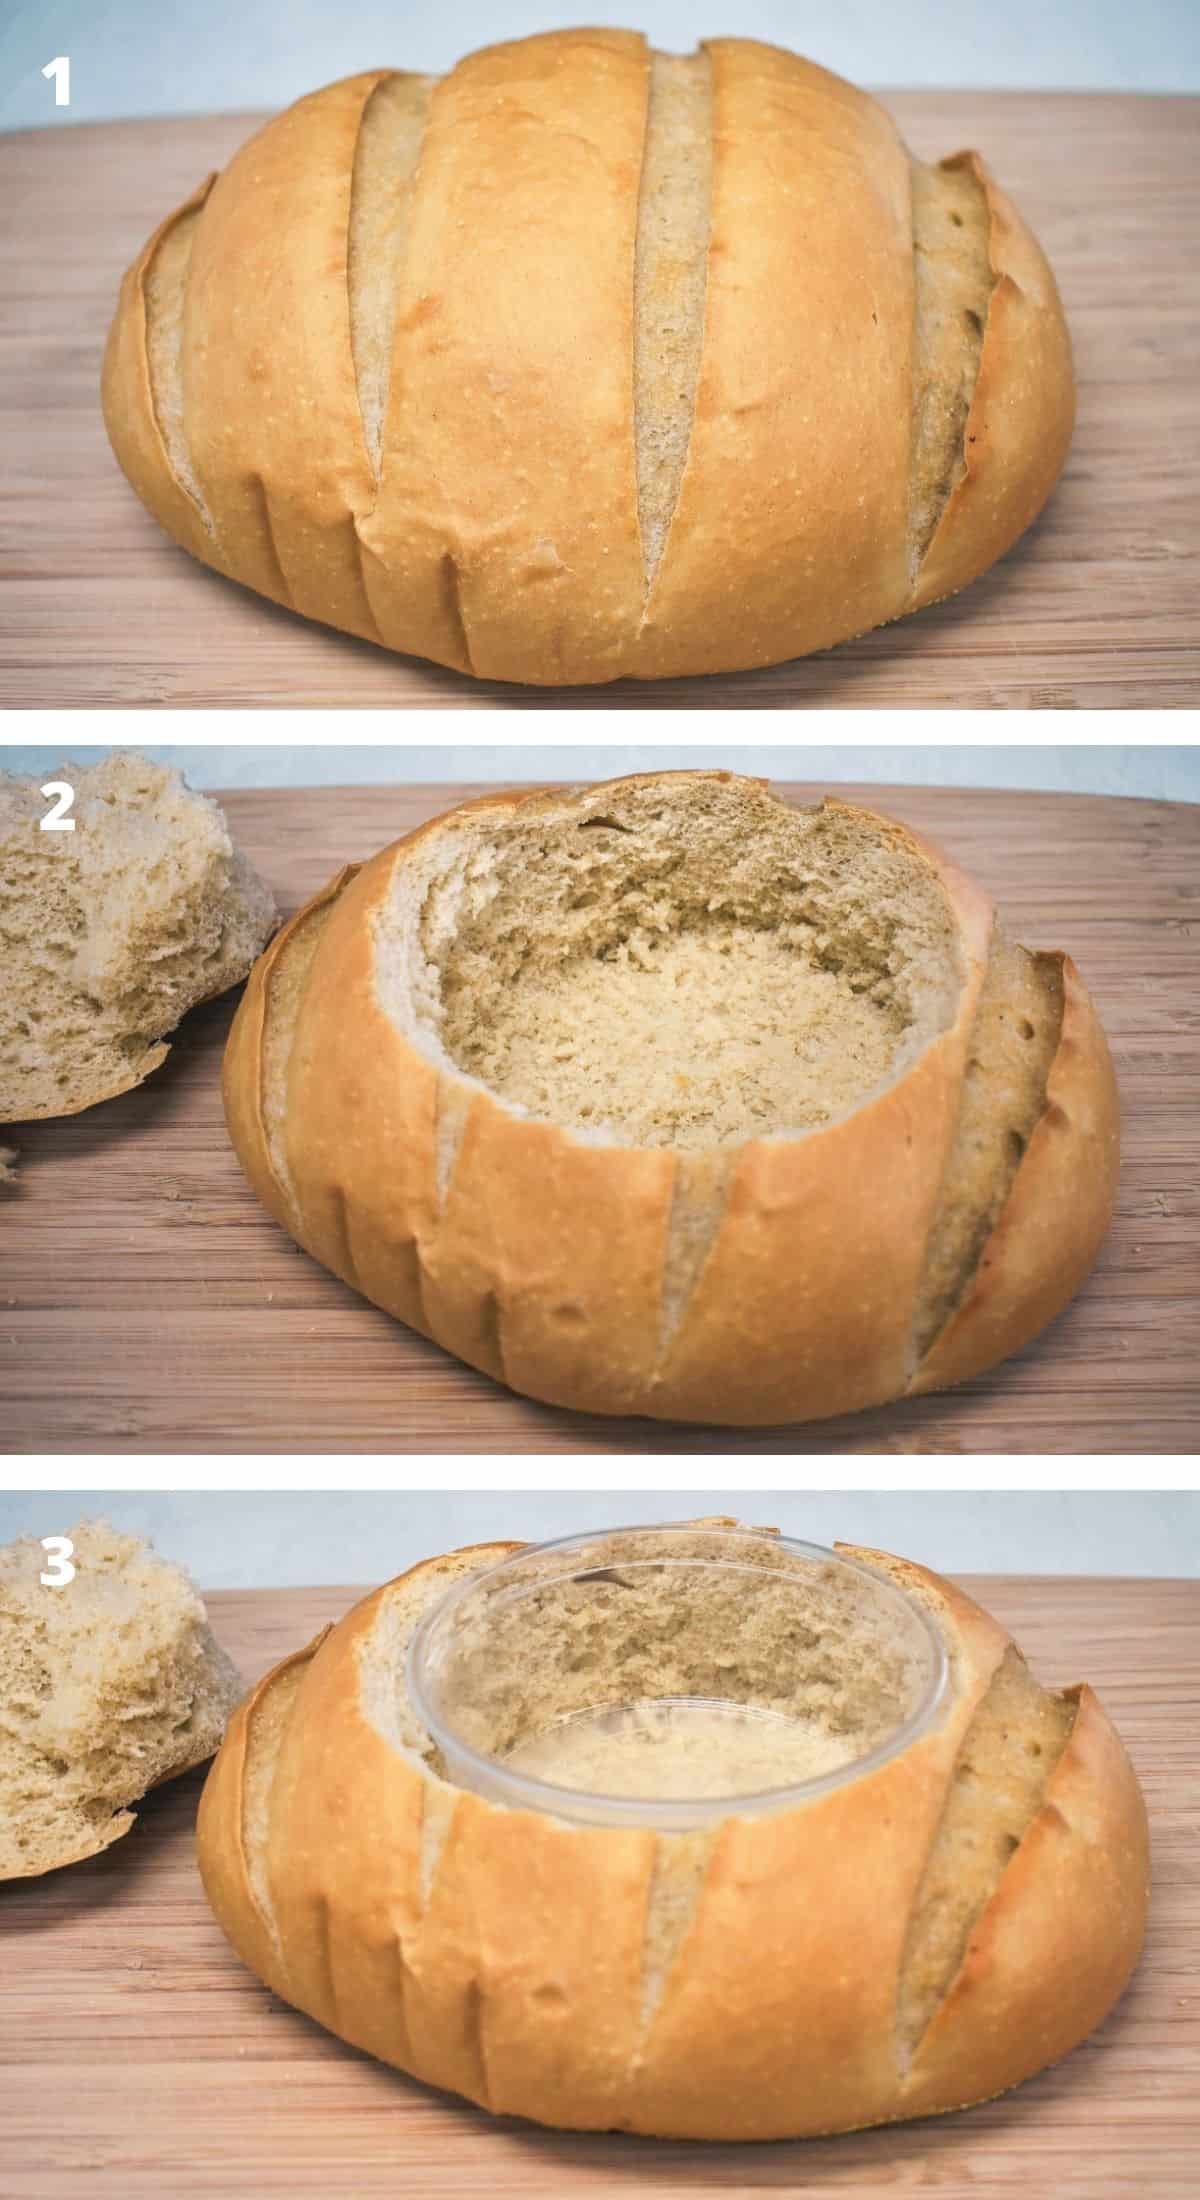 Three images showing the steps to hollowing out a bread bowl.